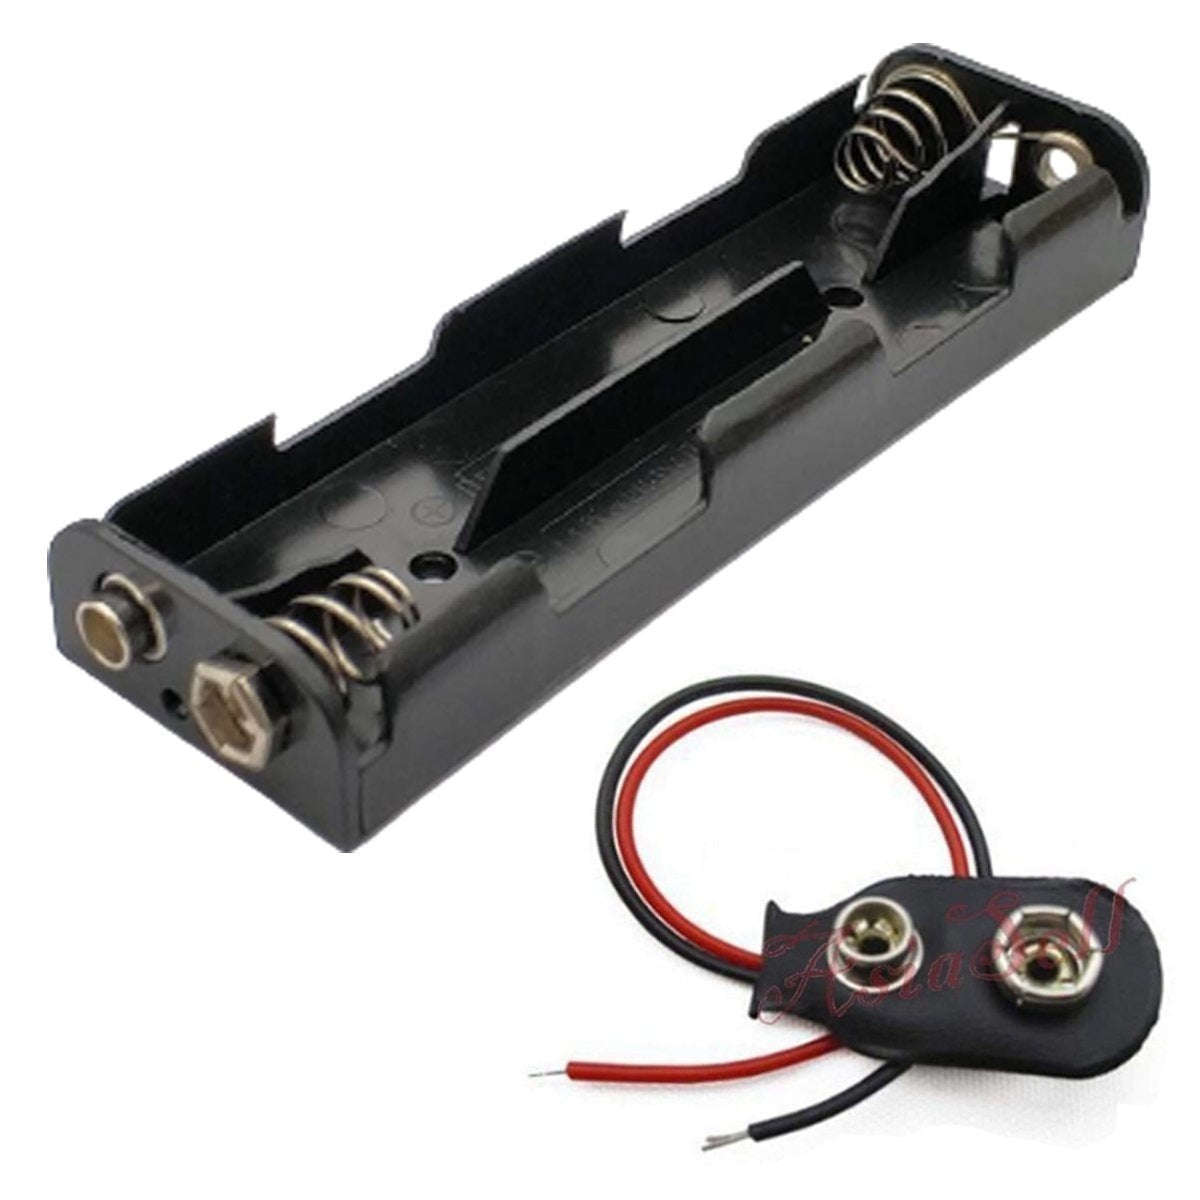 4xAA Battery Holder With Clip End to End Side by Side